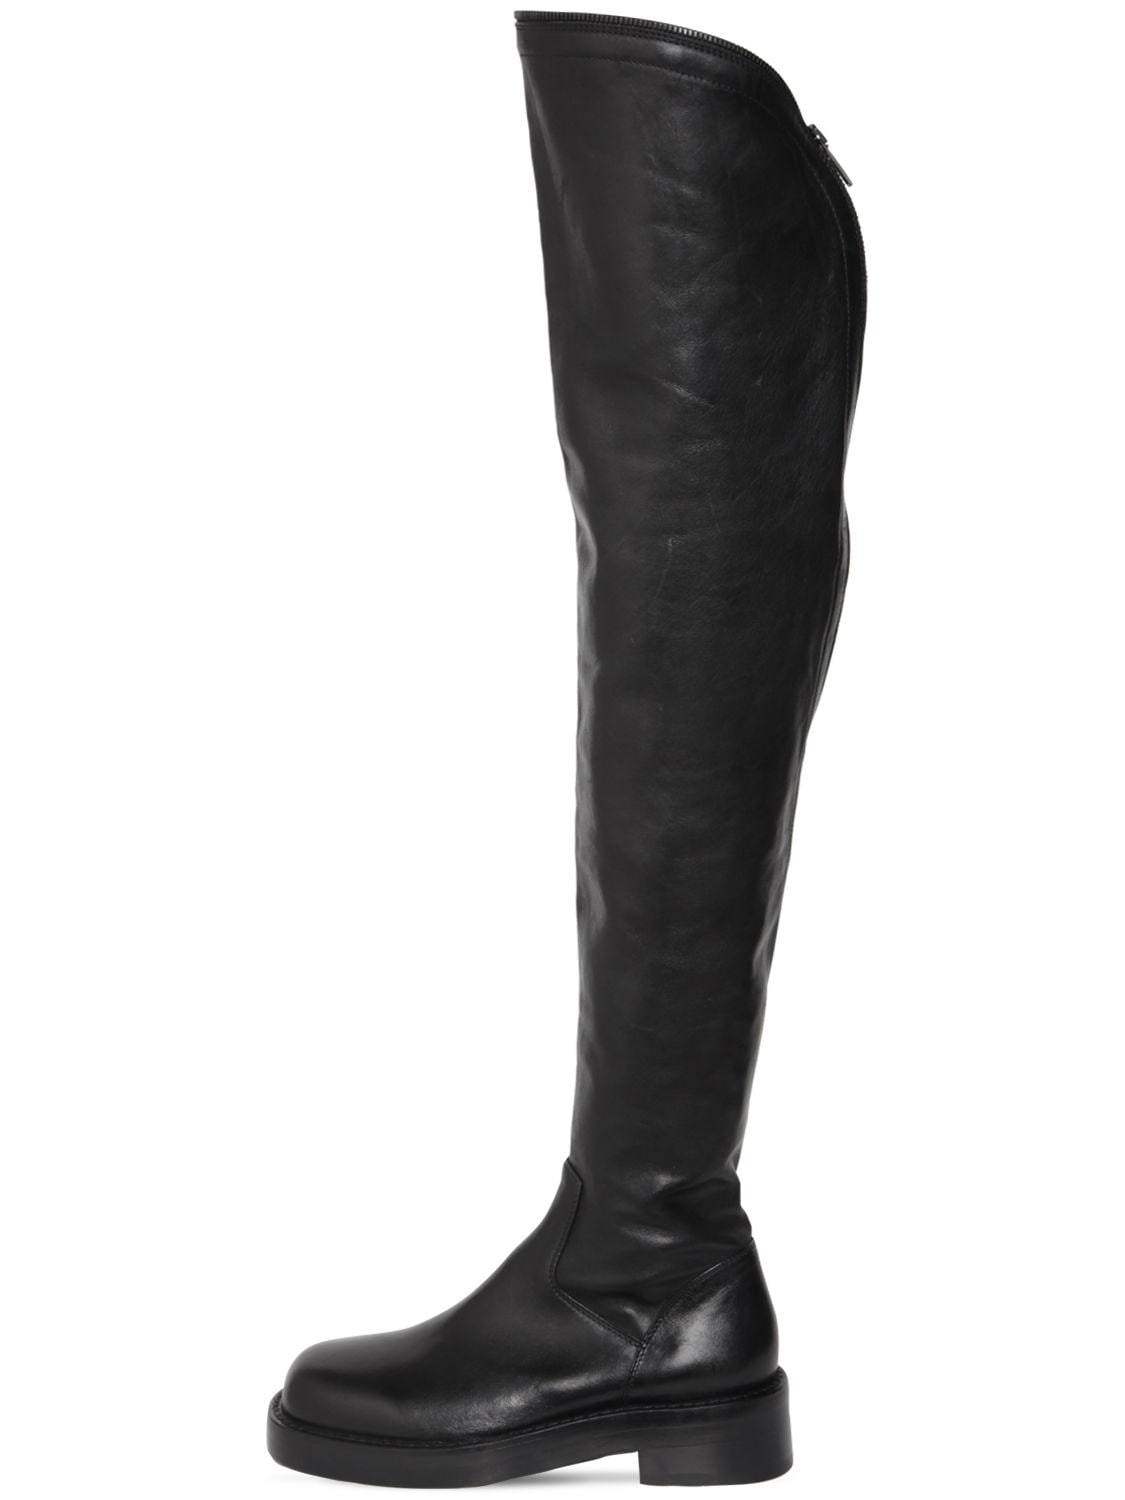 ANN DEMEULEMEESTER 25MM NICKY LEATHER OVER-THE-KNEE BOOTS,74I02U005-MDK50